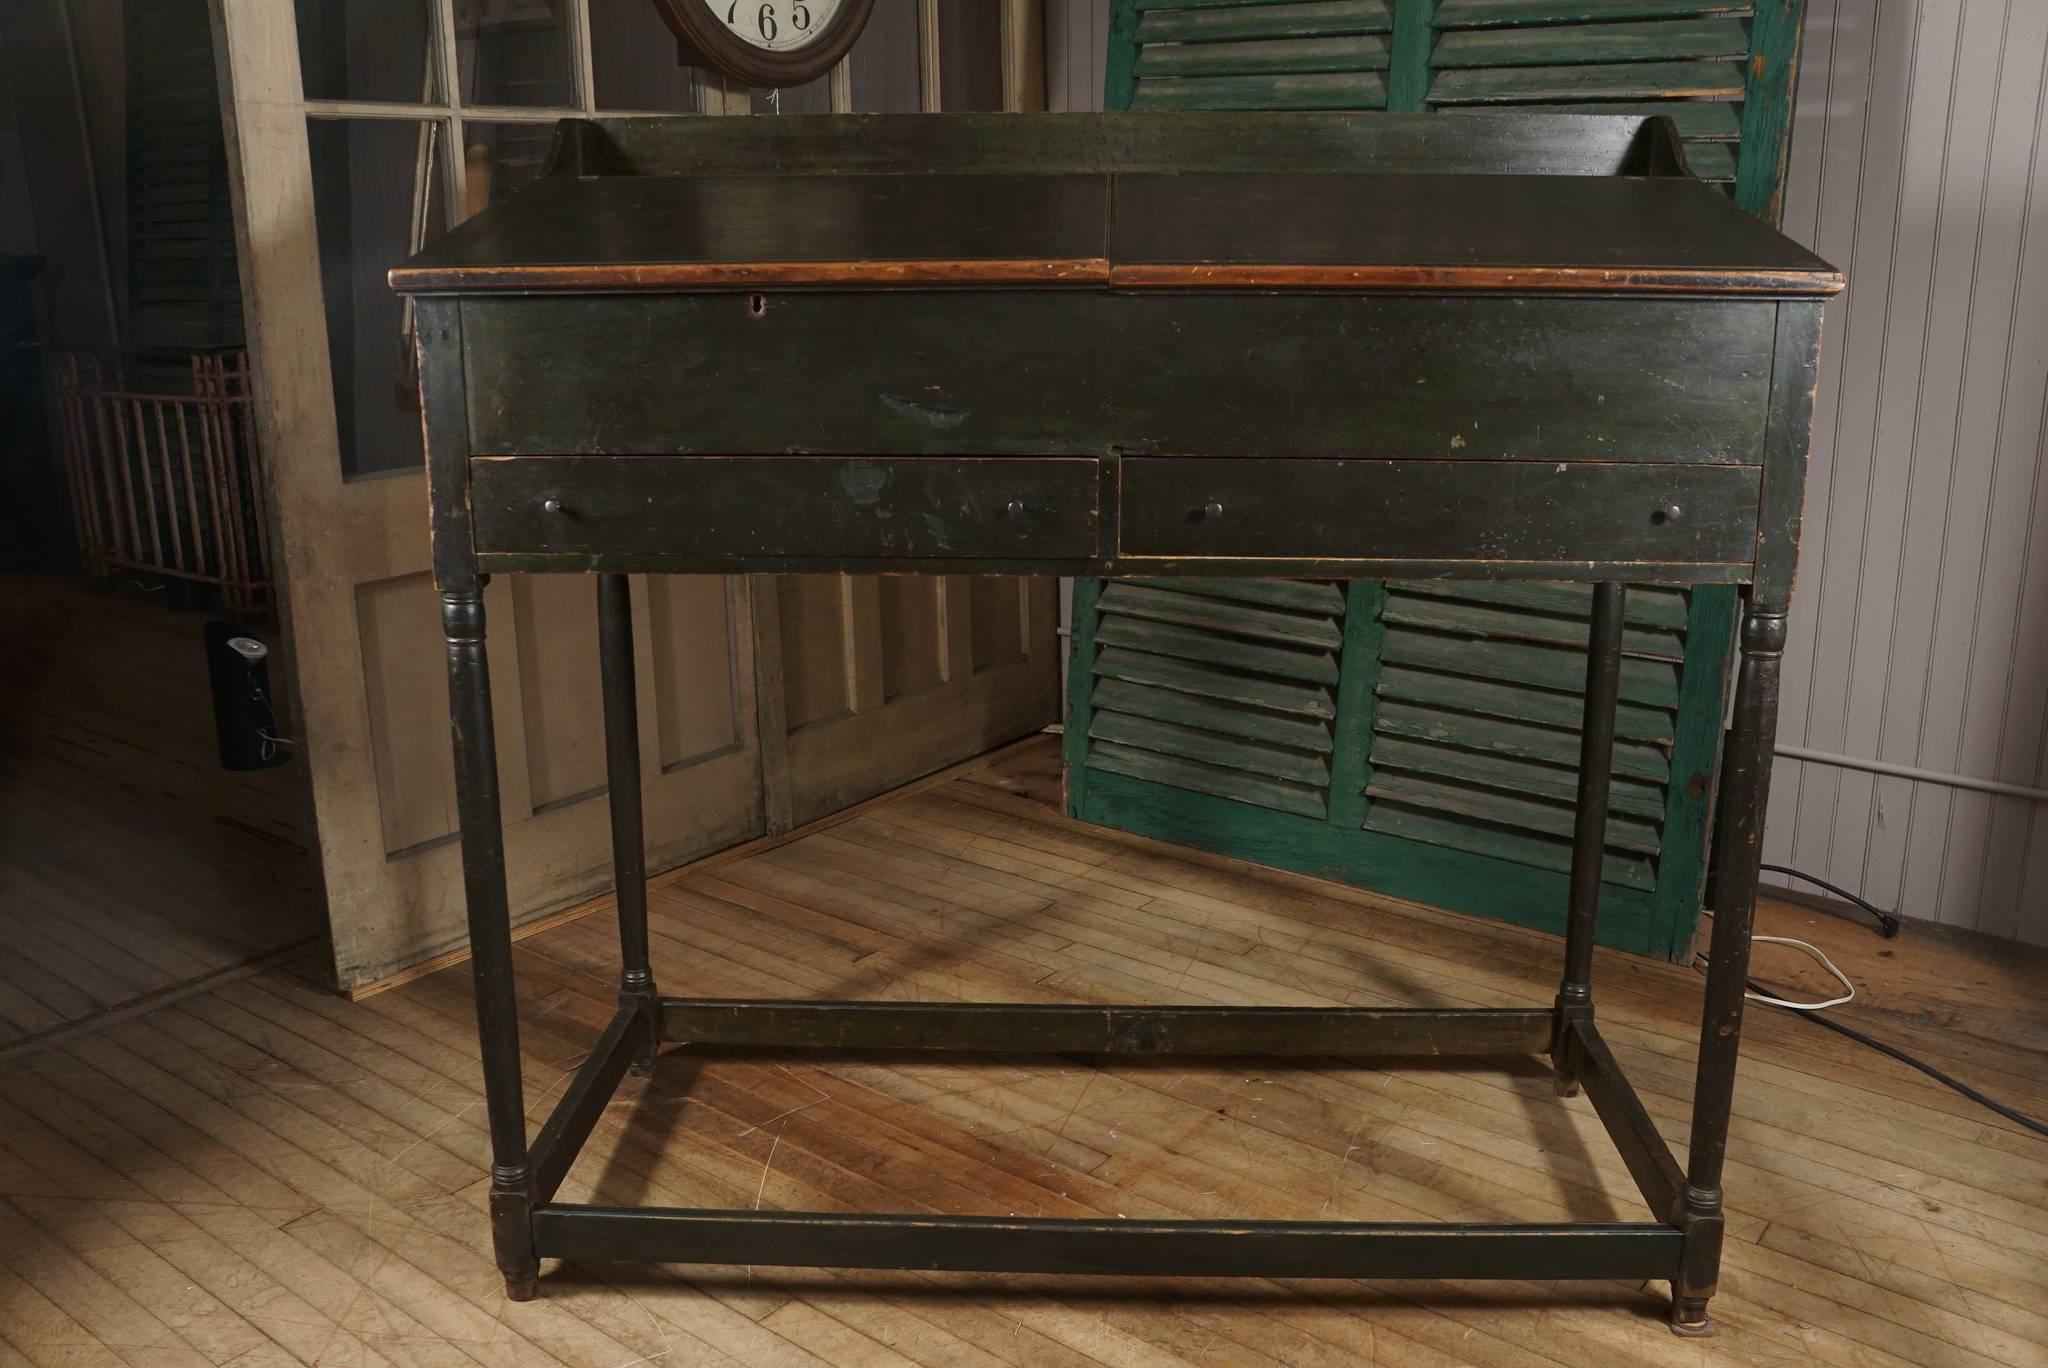 early 19th c New Hampshire partners desk - two breadboard end angled lift lids - one with lock - reveal storage area with cubbies - surmount two drawers - dovetailed gallery - delicately turned stretcher base - in original bottle green paint with a